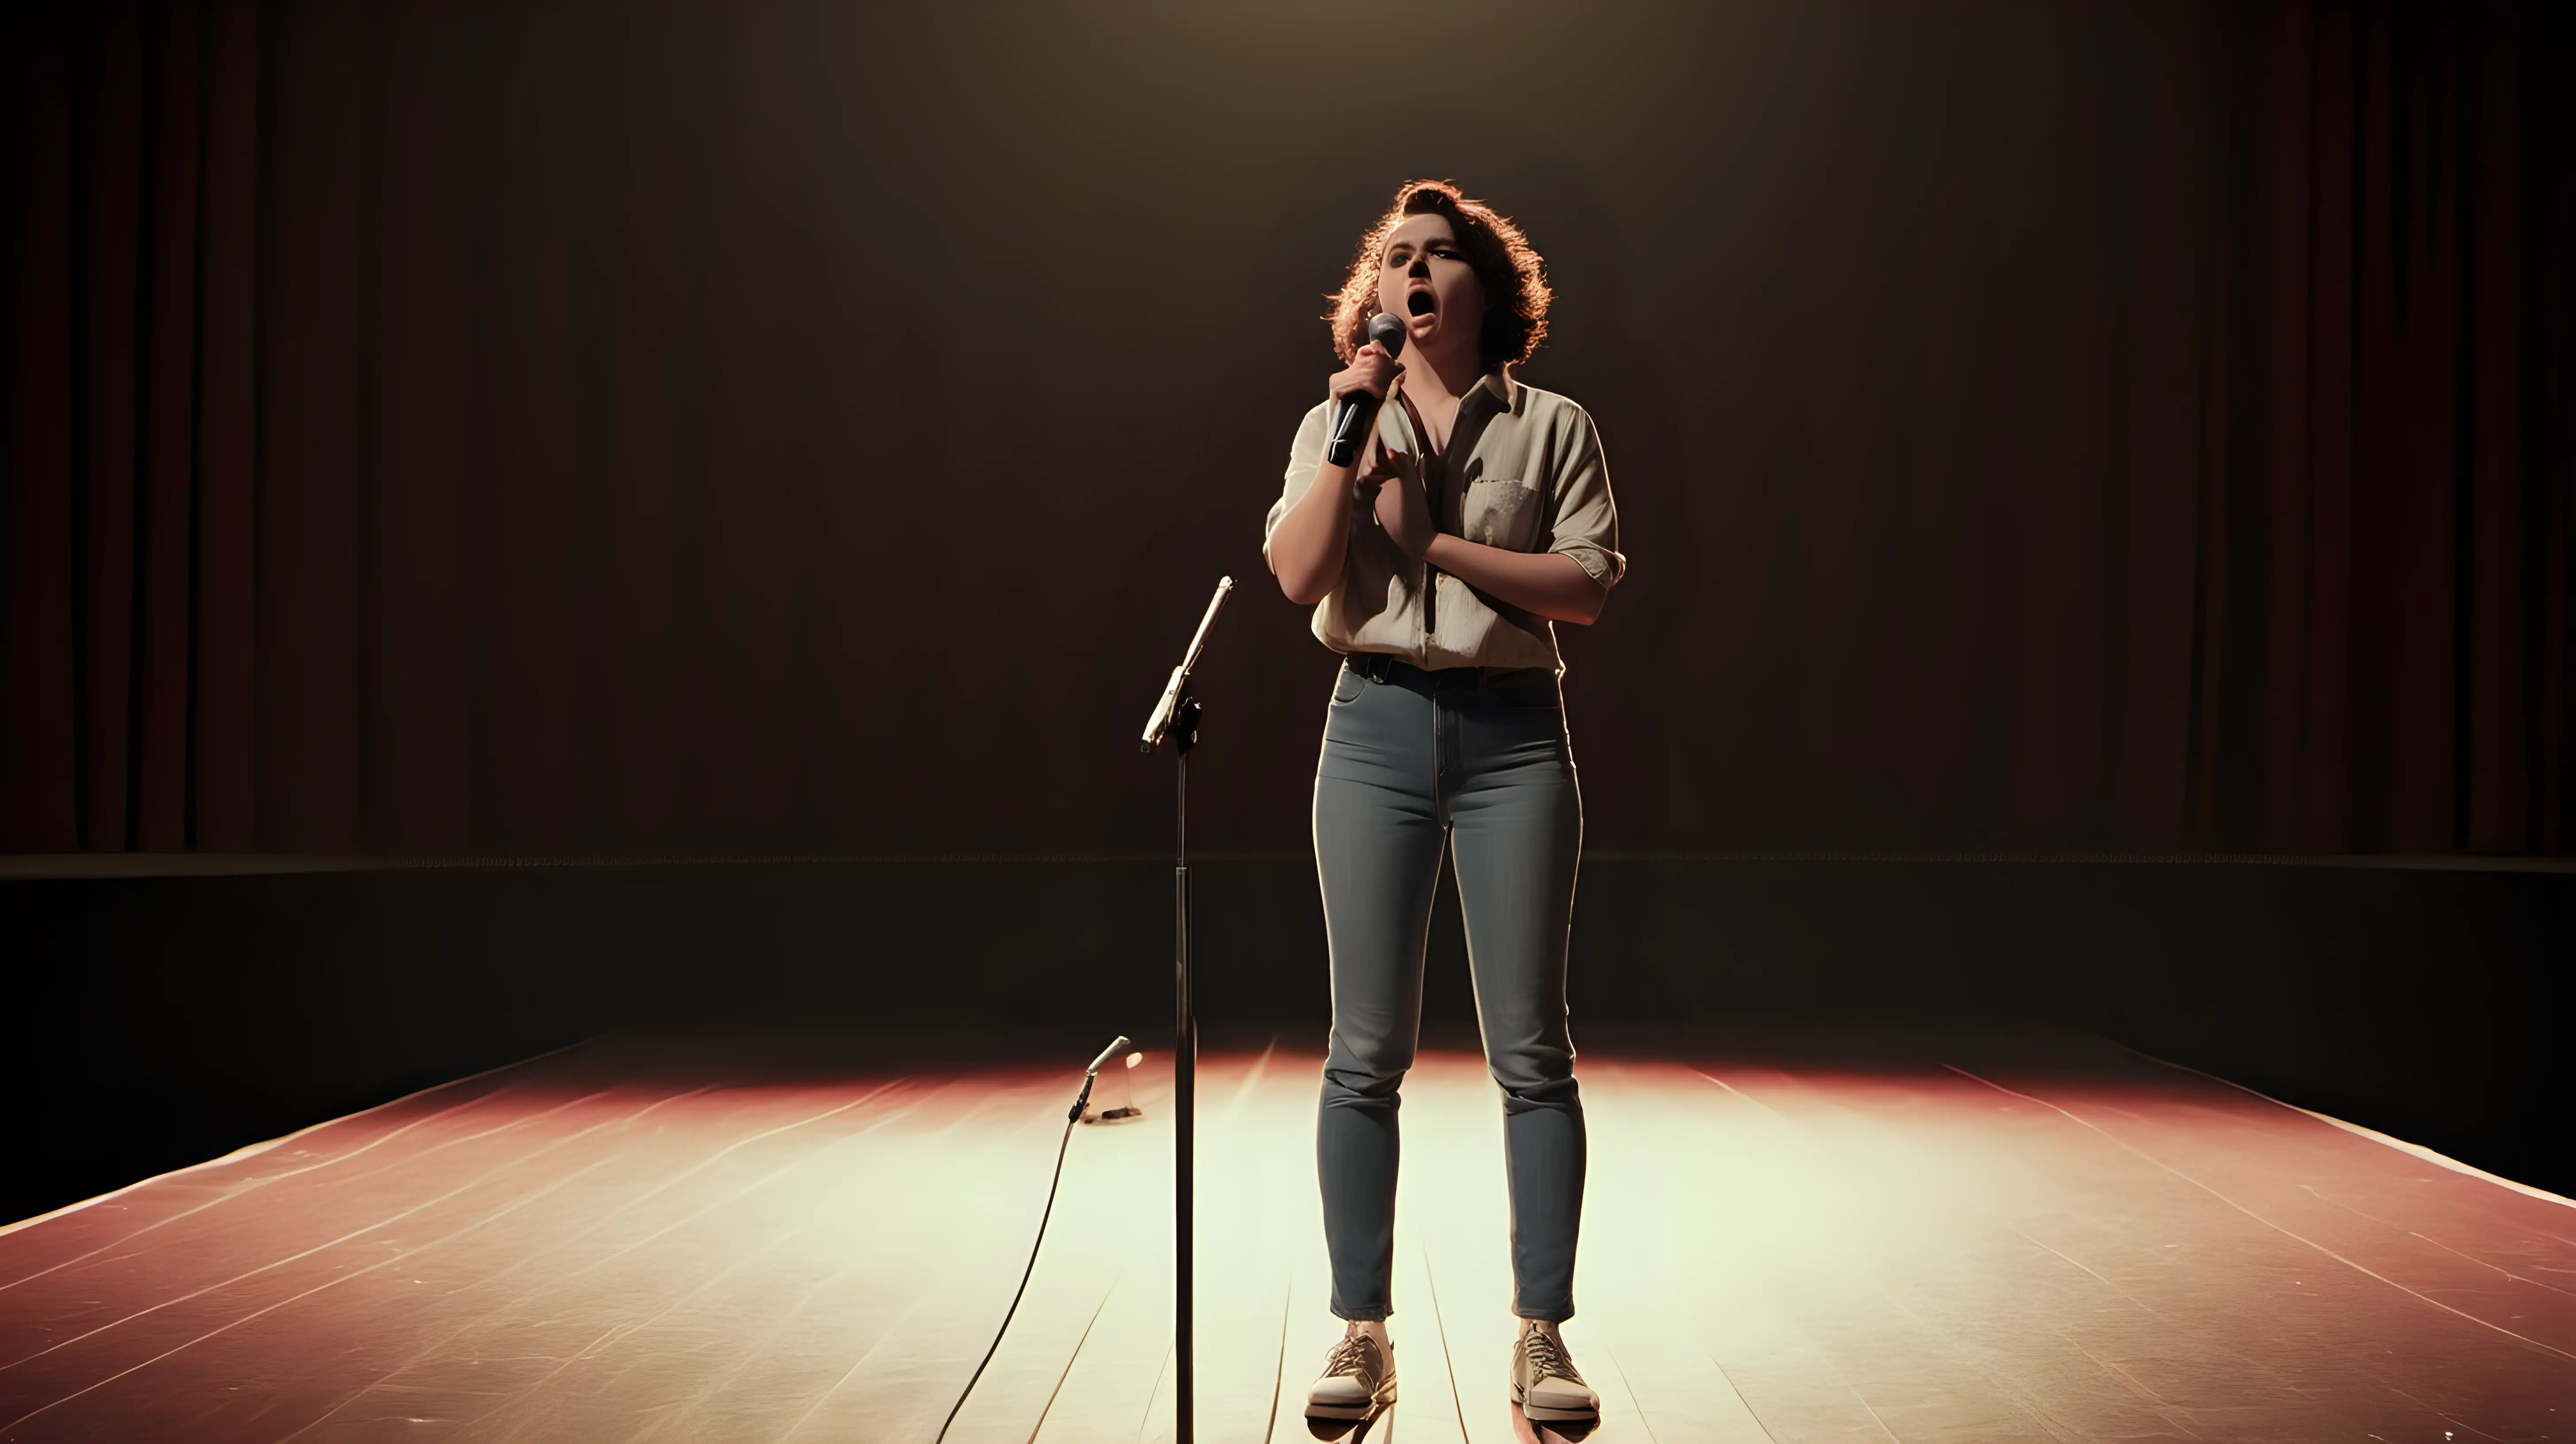 A performer stands on a deserted stage, gripping the microphone with determination, their powerful vocals echoing through the empty auditorium.
